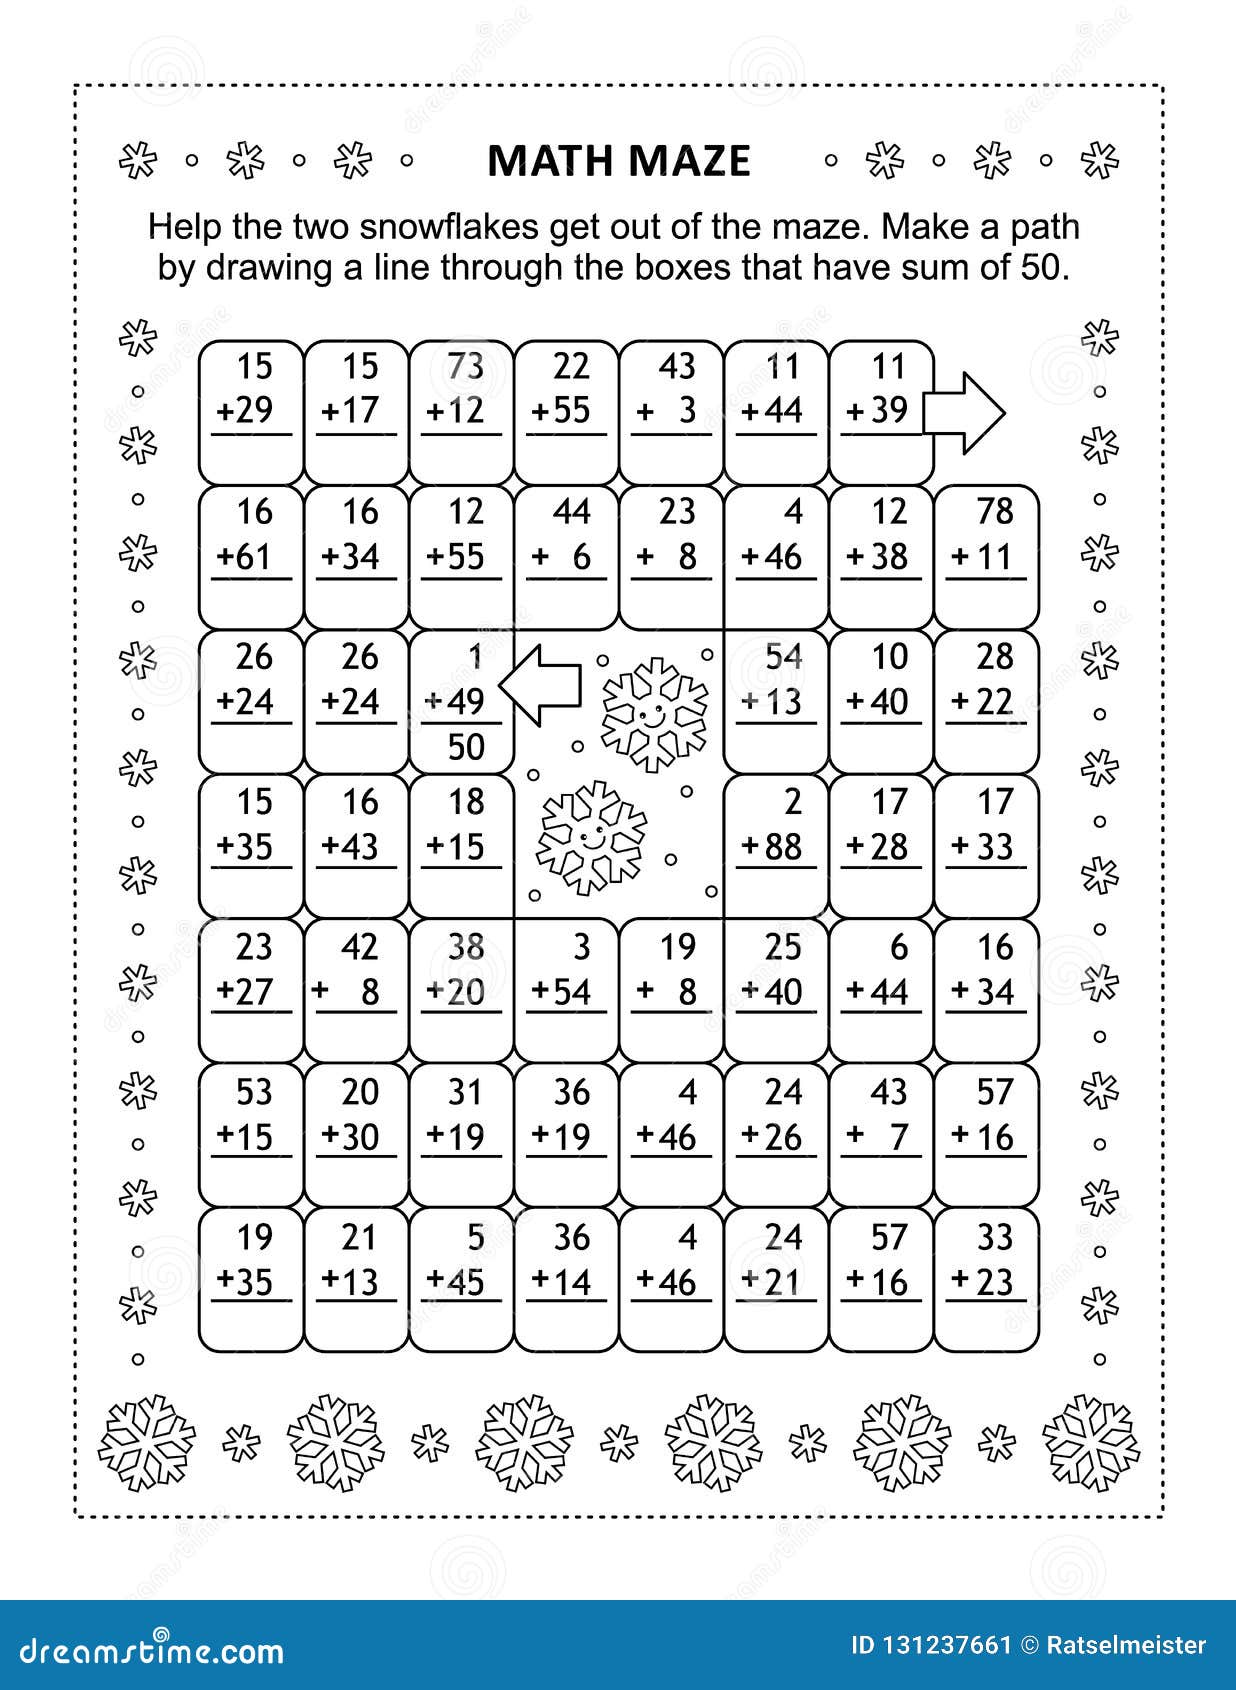 math maze with addition facts for numbers up to 50